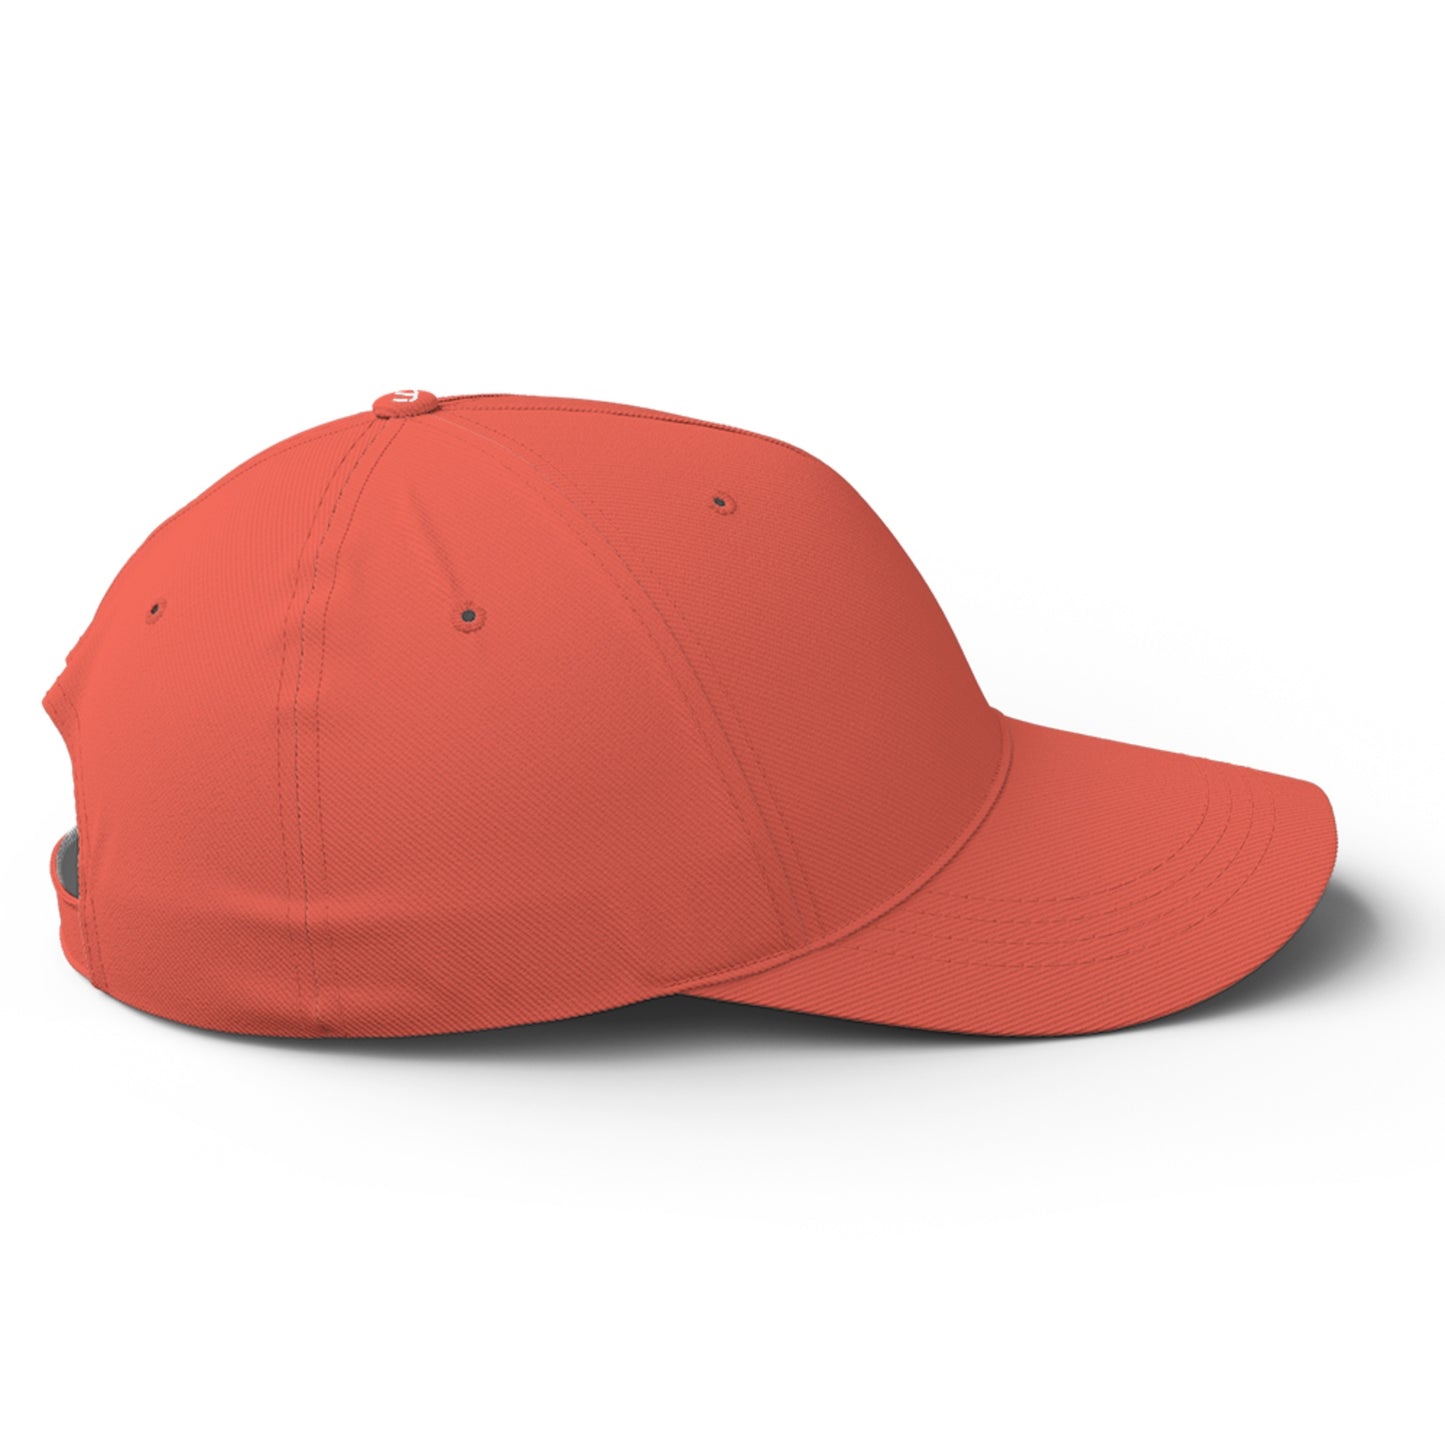 Ivyvine Unlimited Baseball Cap Red/white